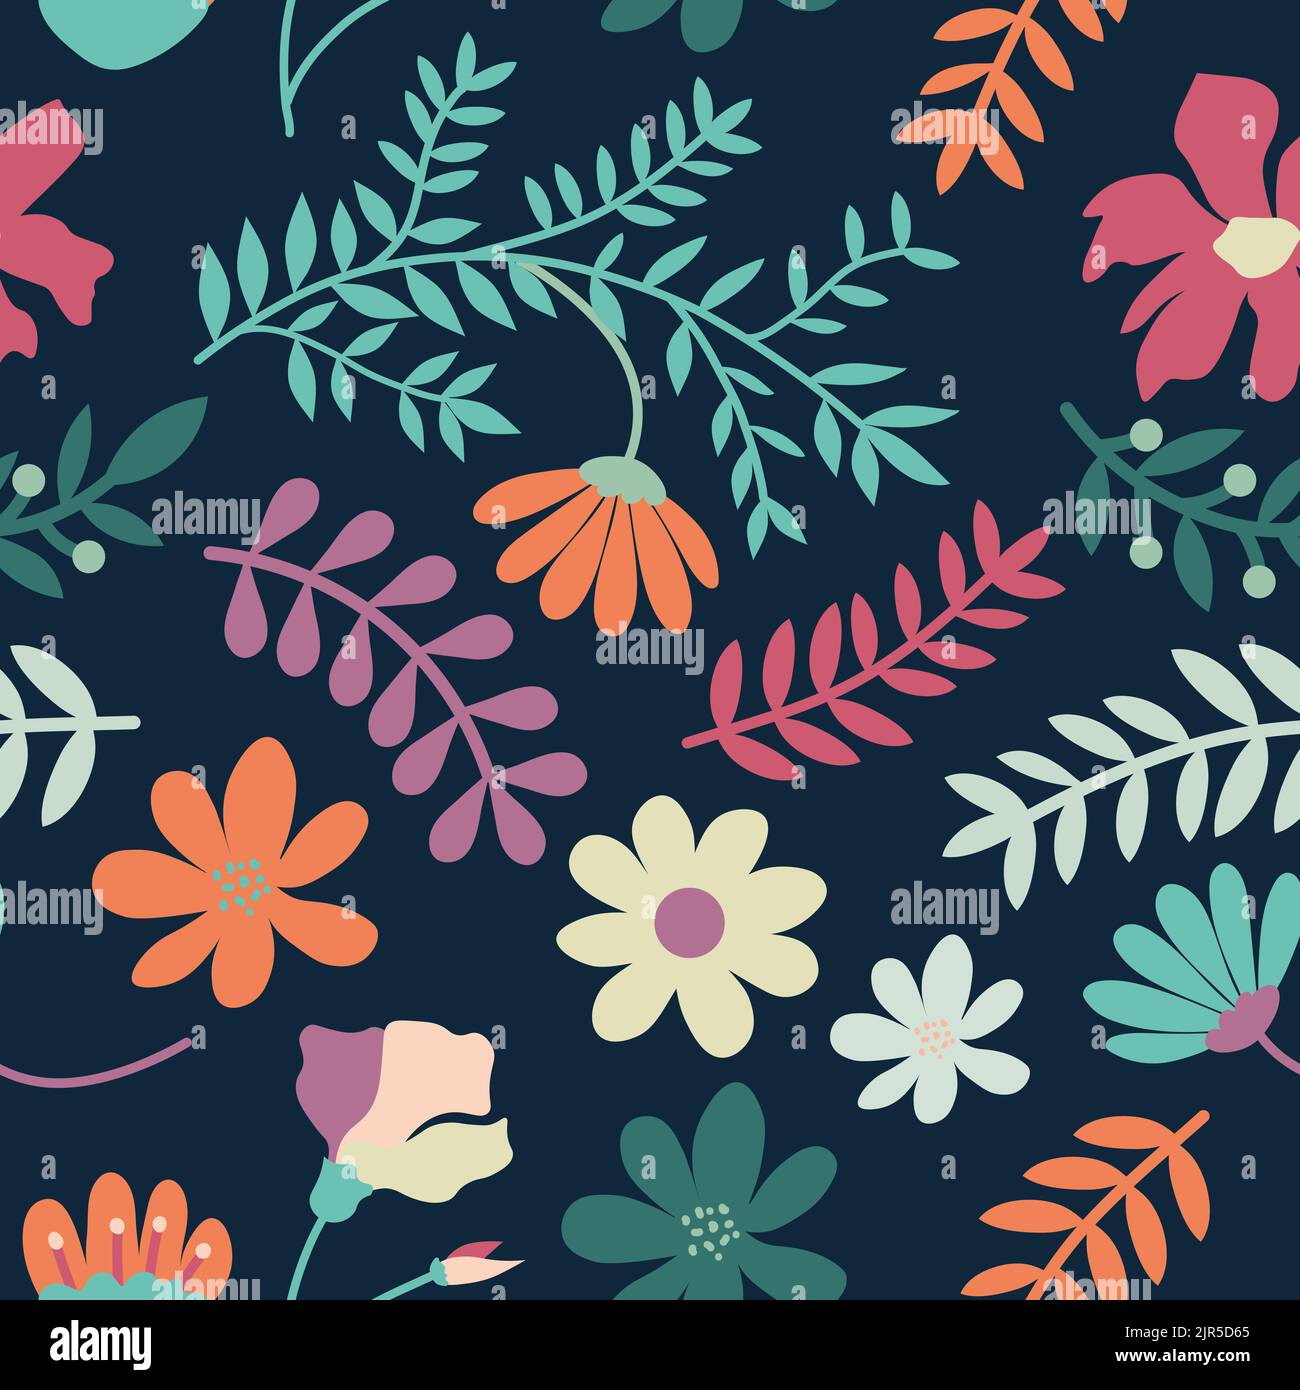 Flowers and twigs seamless pattern Stock Vector